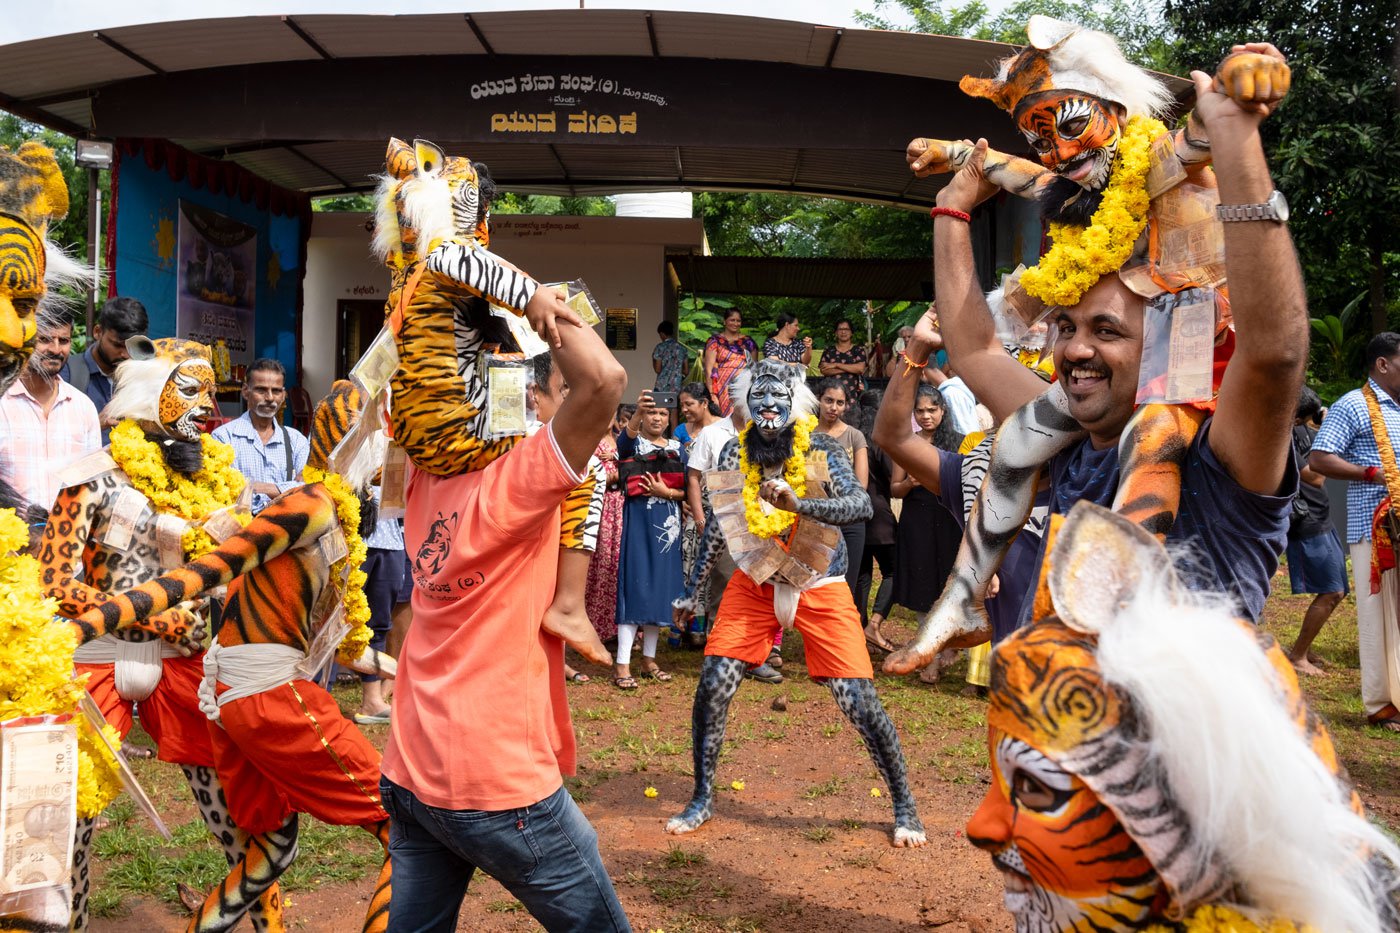 Villagers lift the young tiger dancers and dance to the drum beats